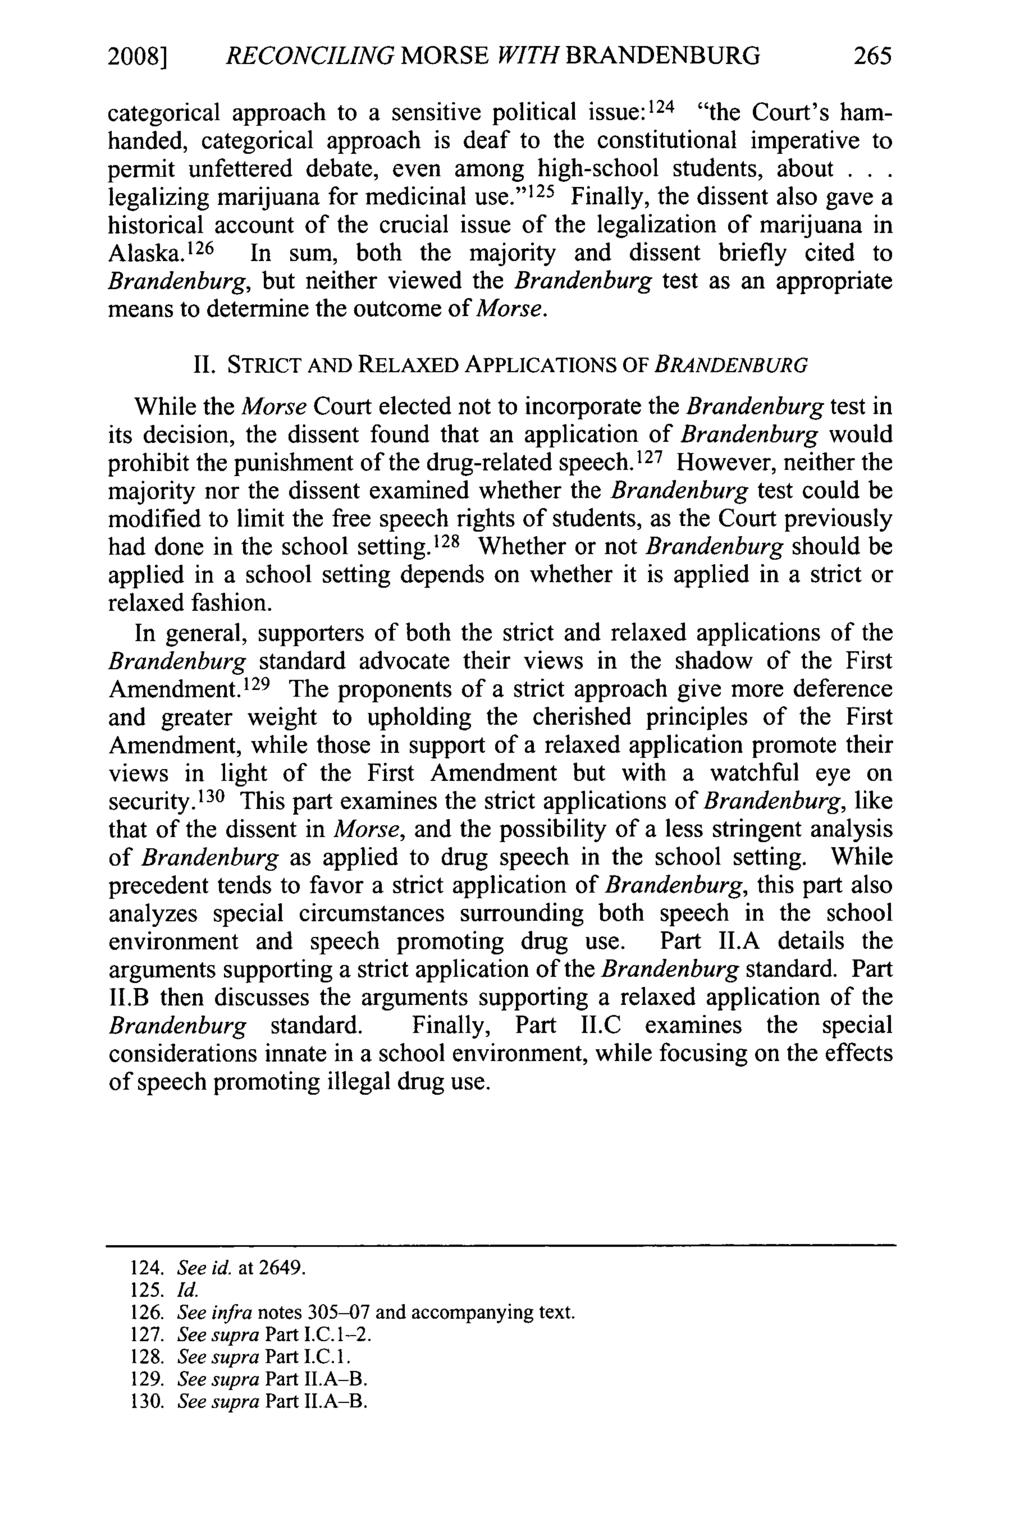 2008] RECONCILING MORSE WITH BRANDENBURG 265 categorical approach to a sensitive political issue: 124 "the Court's hamhanded, categorical approach is deaf to the constitutional imperative to permit